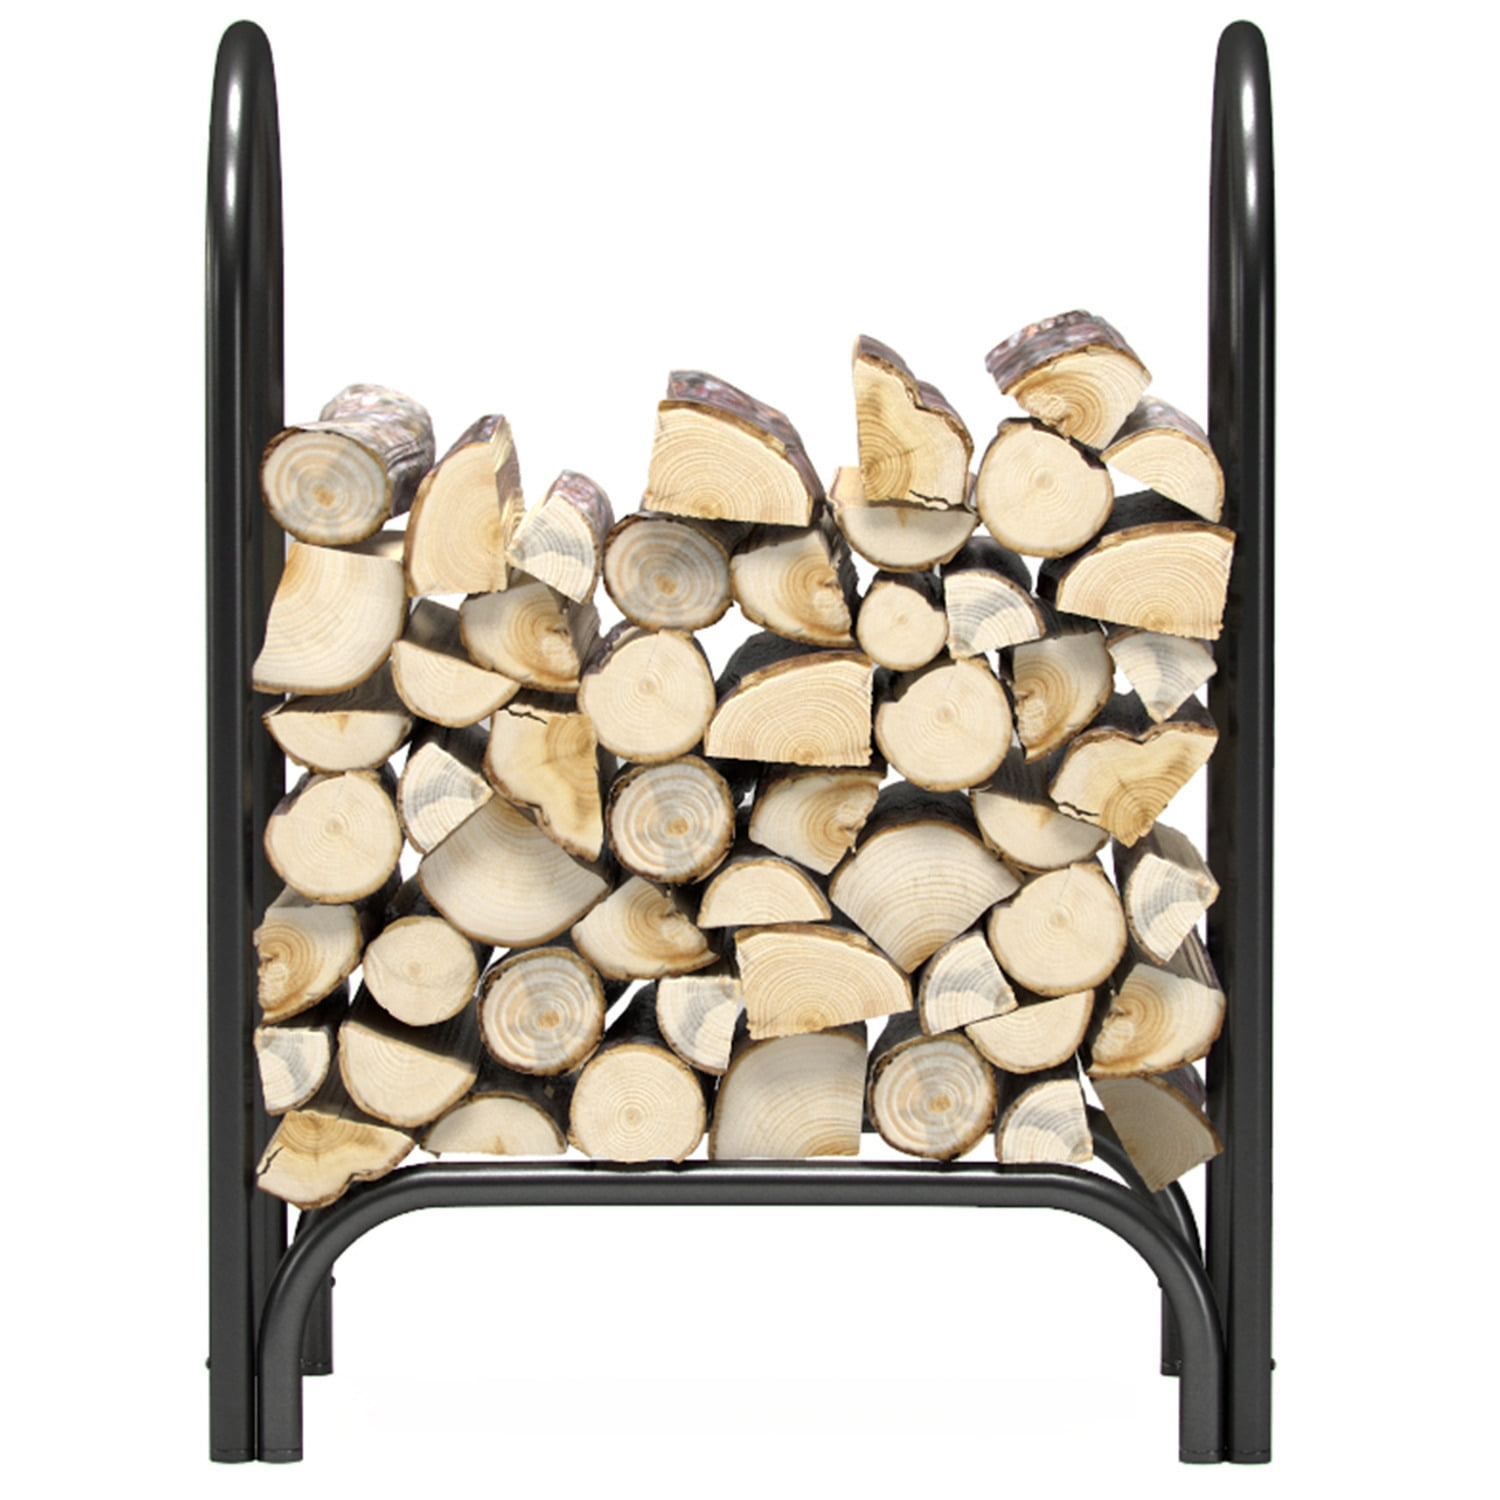 Regal Flame 28" Heavy Duty Firewood Shelter Log Rack for Fireplaces and Fire Pits to Enjoy a Real Fire or Complement Vent-Free